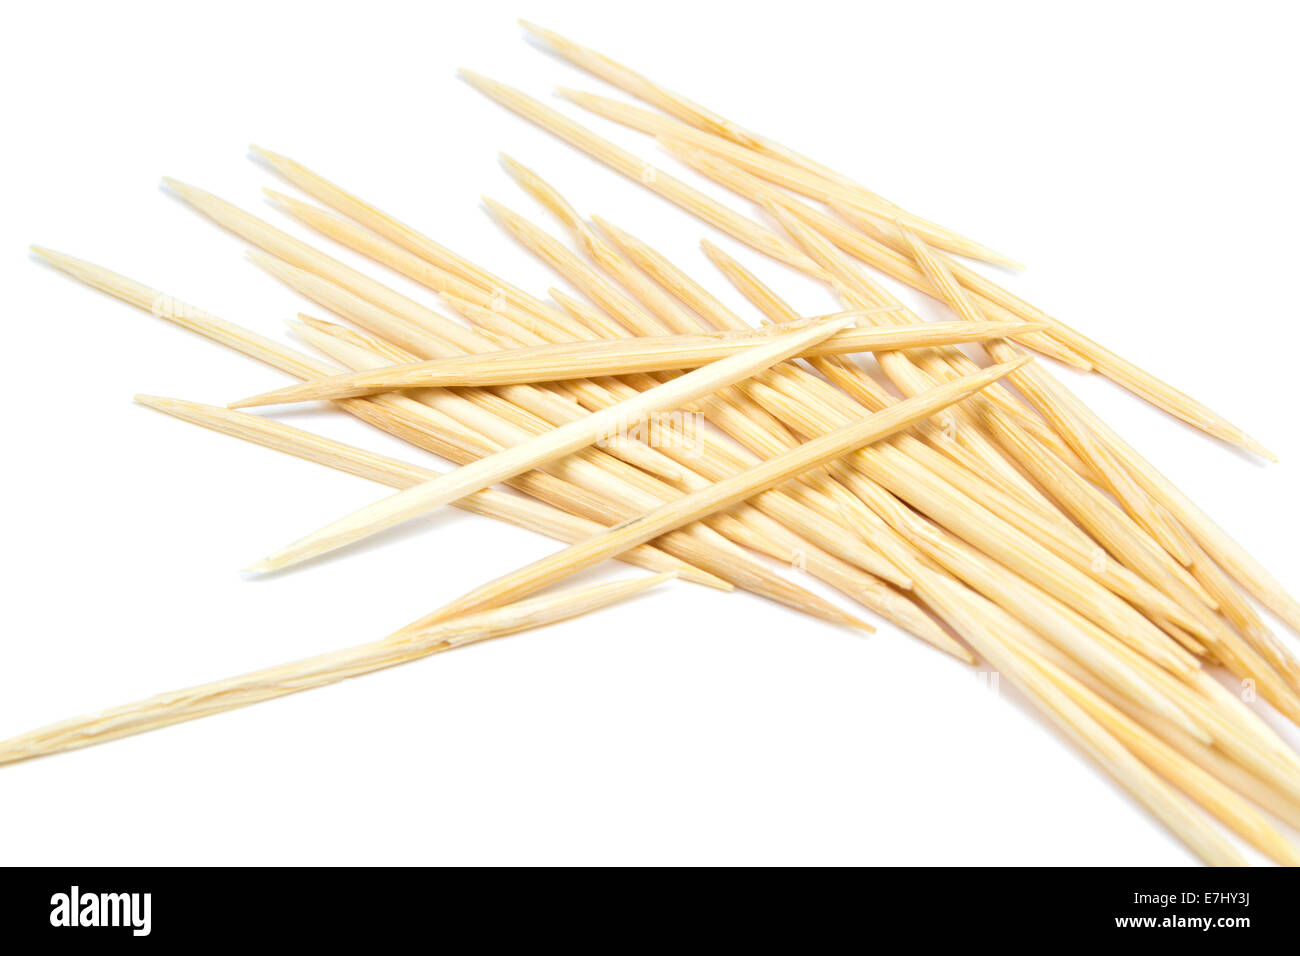 Many of the toothpick on a white background Stock Photo